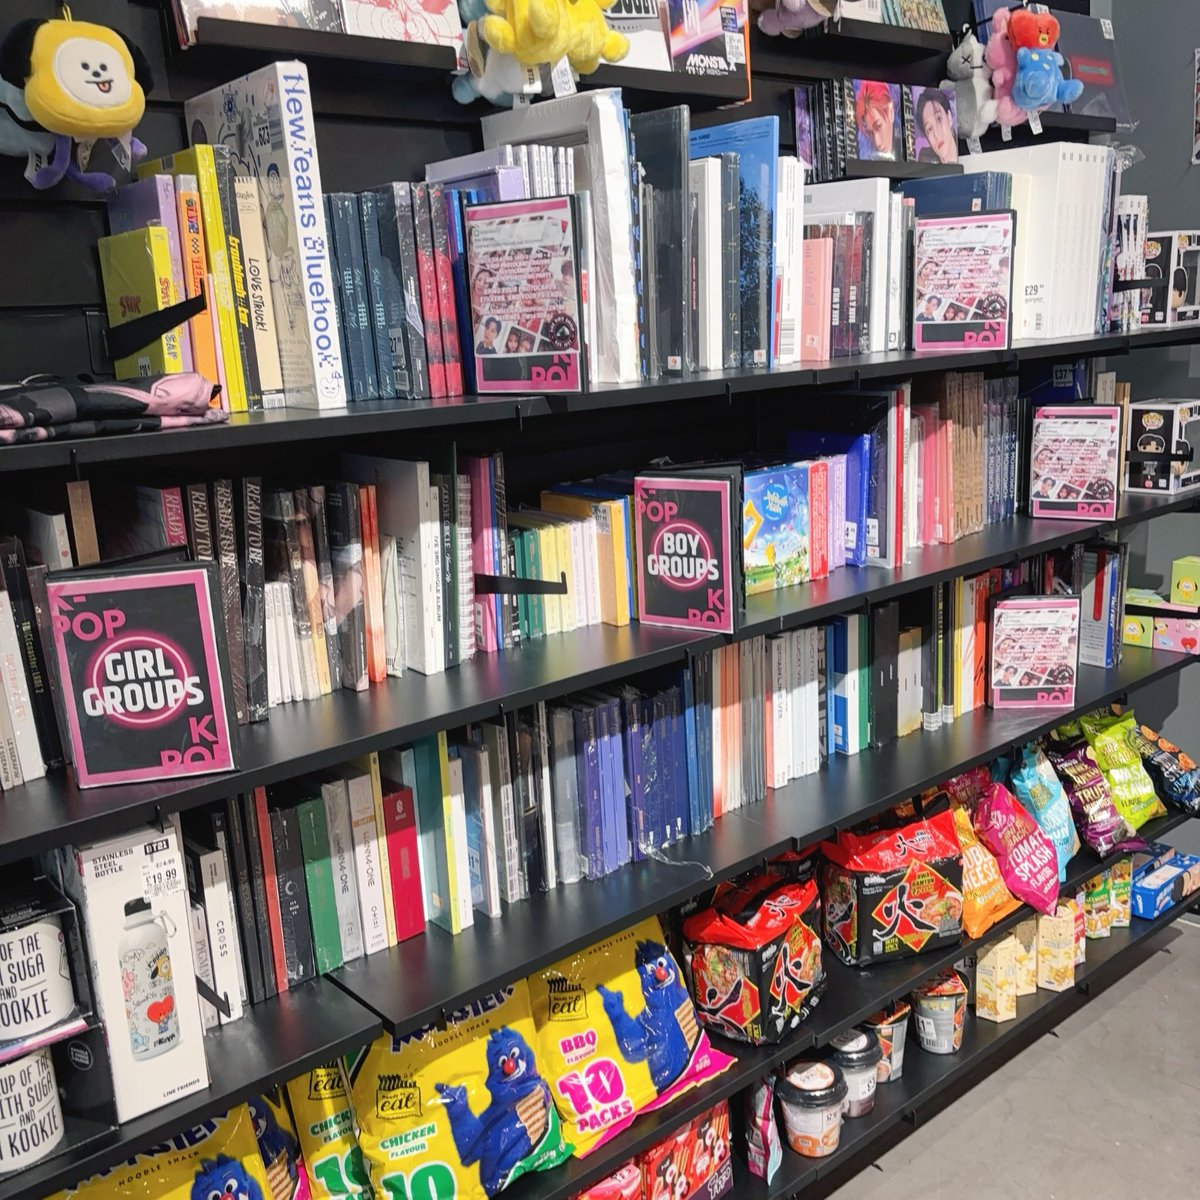 KPOP RESTOCK ALERT 💘 

SKZ, SEVENTEEN, AESPA, TWICE, ITZY, BTS, BP & MORE !! 💗

& DON’T FORGET TO JOIN US ON APRIL 3RD, 3:00PM - 4:30PM
- KPOP PHOTOCARD TRADING
- PHOTOCARD DECO
- KPOP LISTENING PARTY!
hmv ELMSLEIGH SHOPPING CENTRE,
STAINES, TW18 4QB

#hmv #hmvstaines #hmvkpop